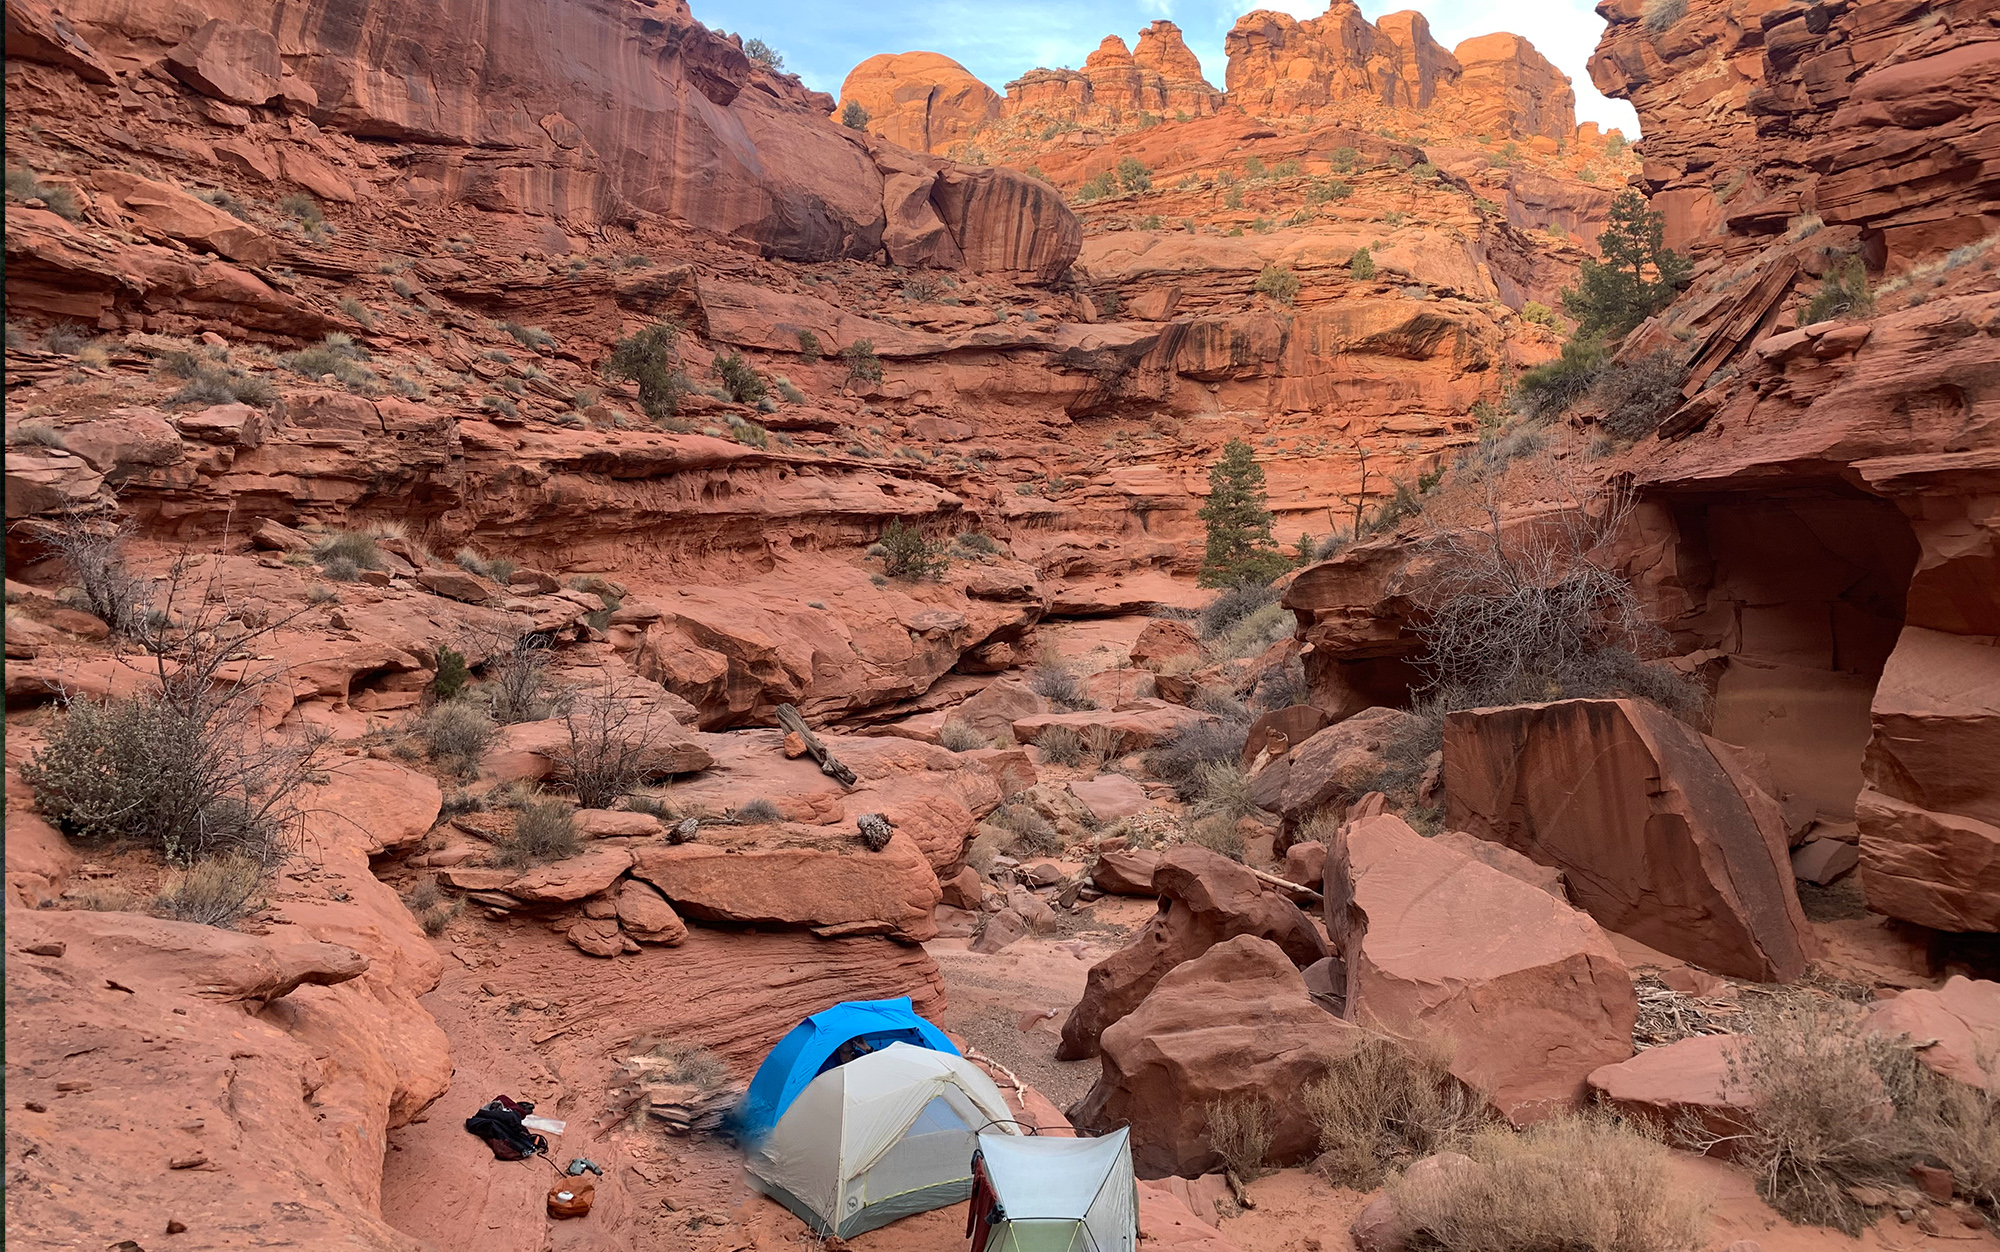 Pitching your tent on a rock shelf can help protect from flash floods in the canyons of the southwest.